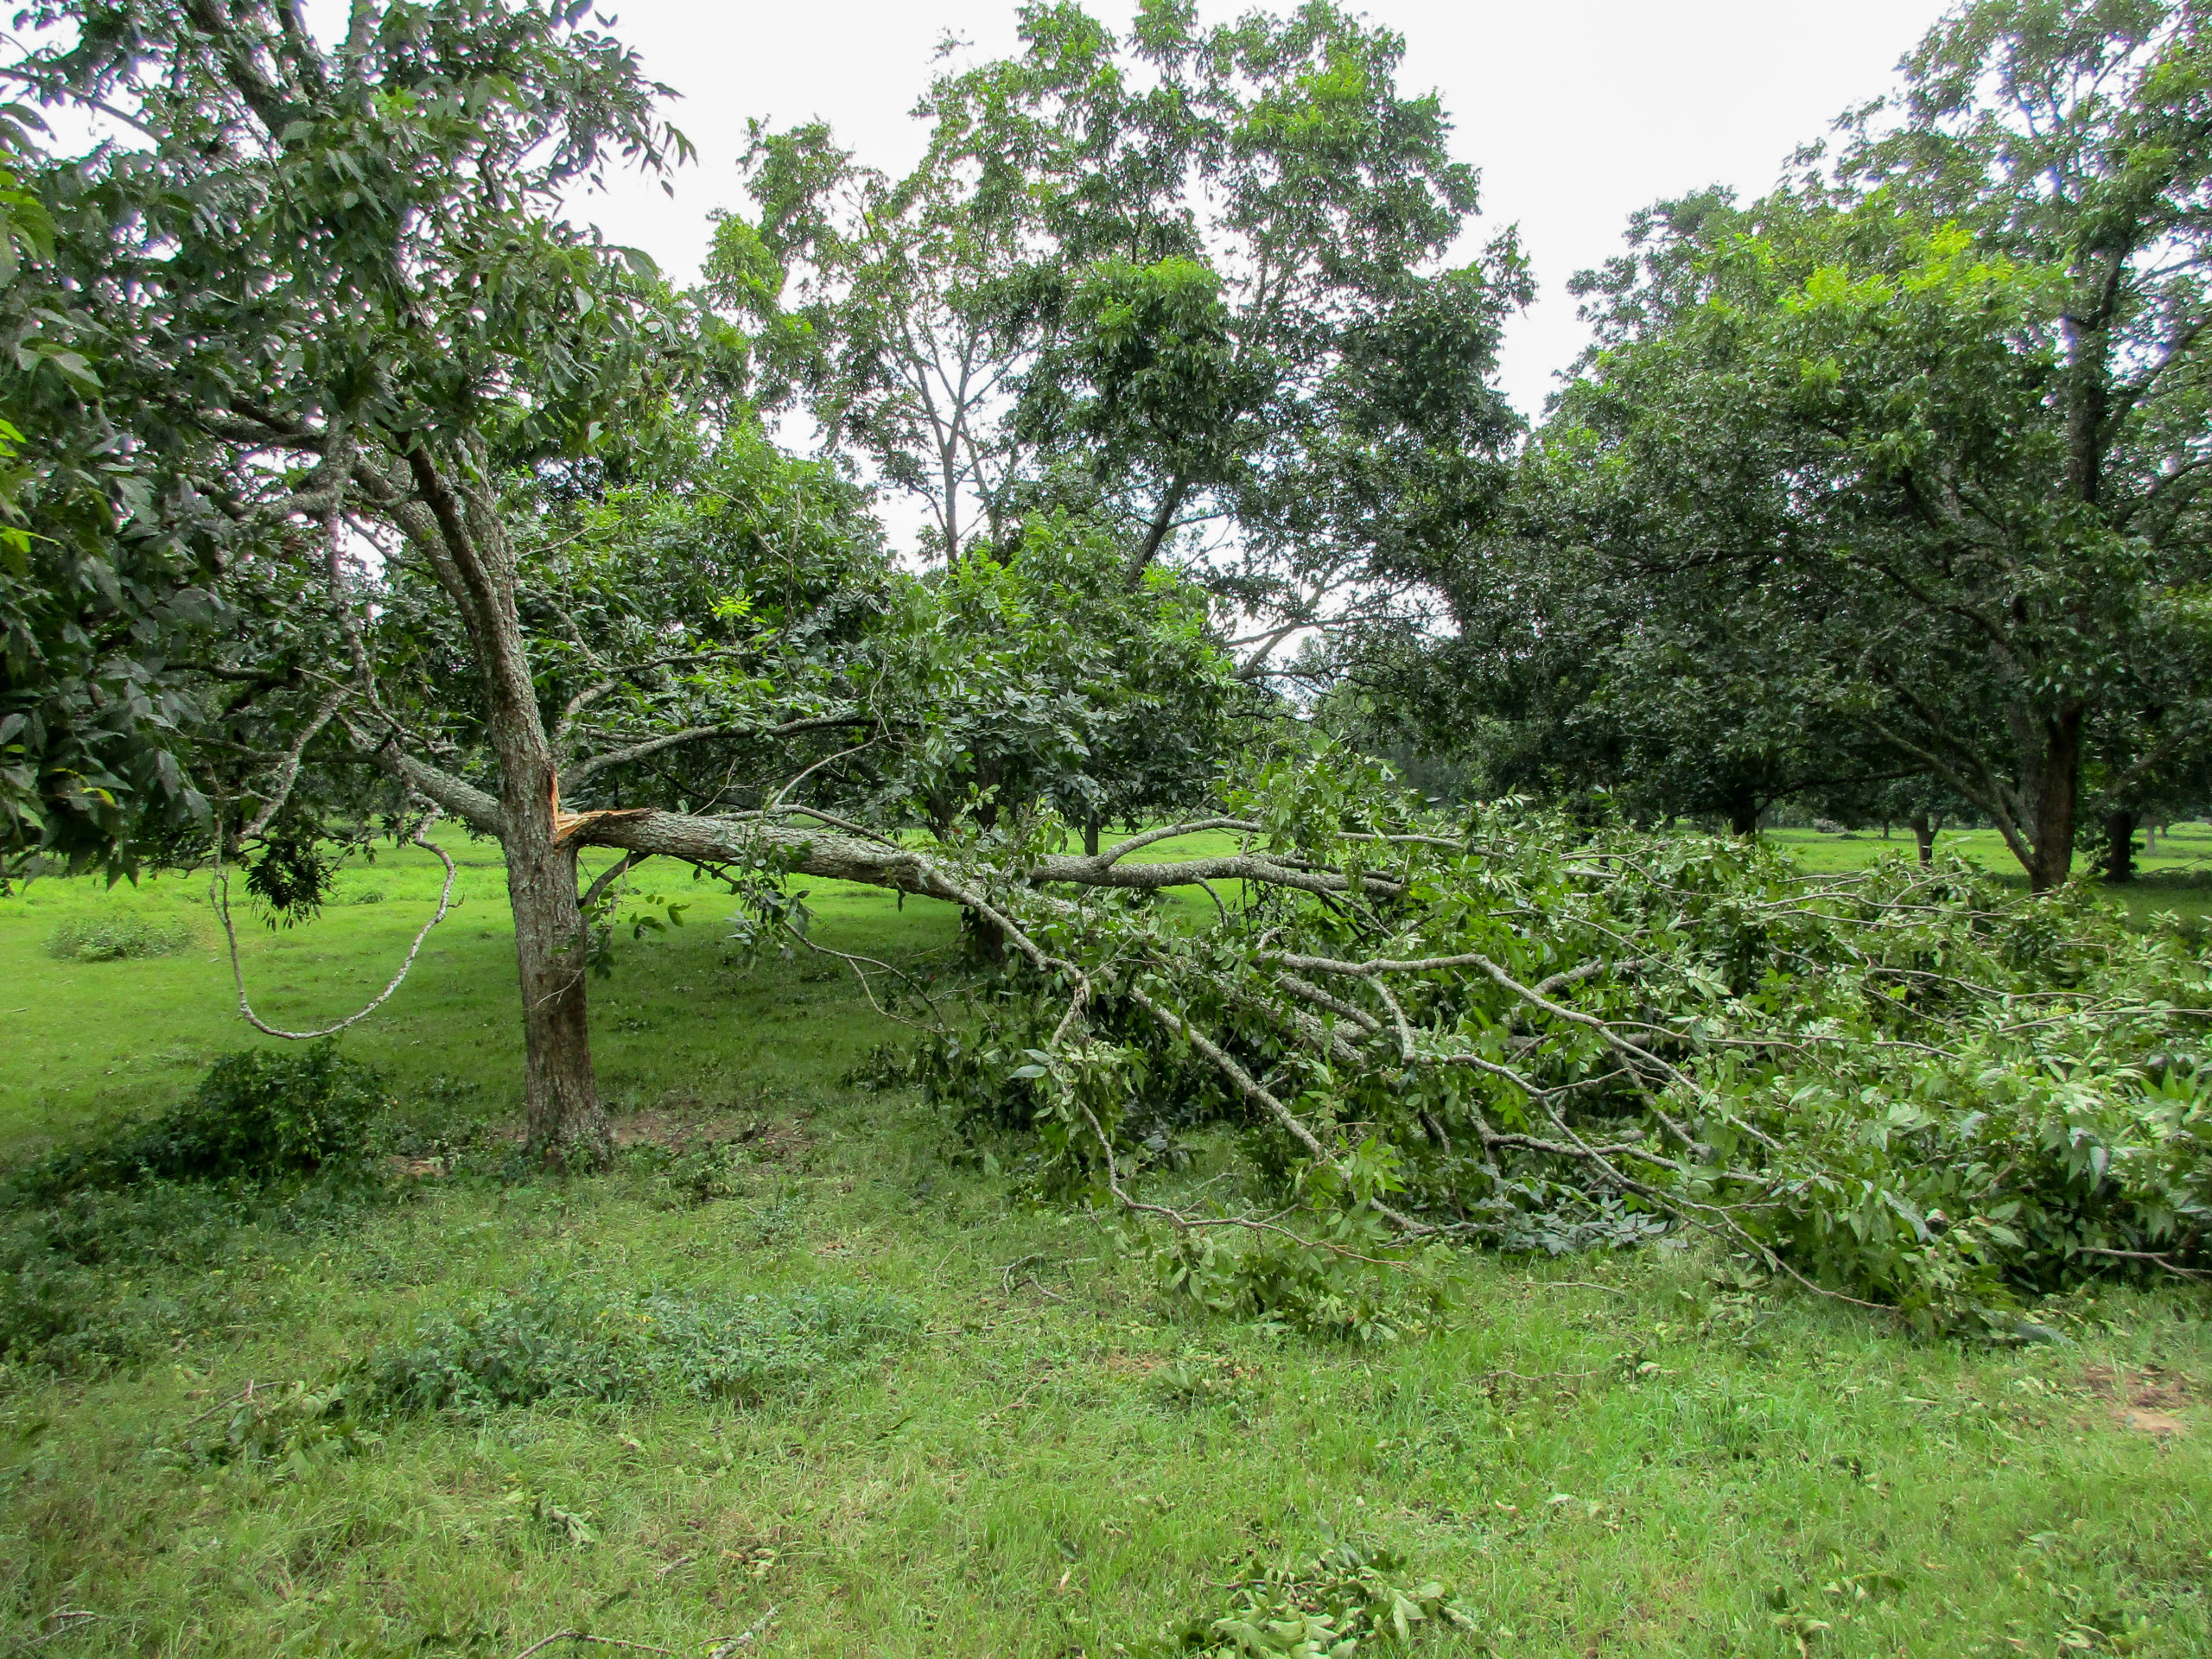 A large mature pecan tree was split in half by Hurricane Laura.